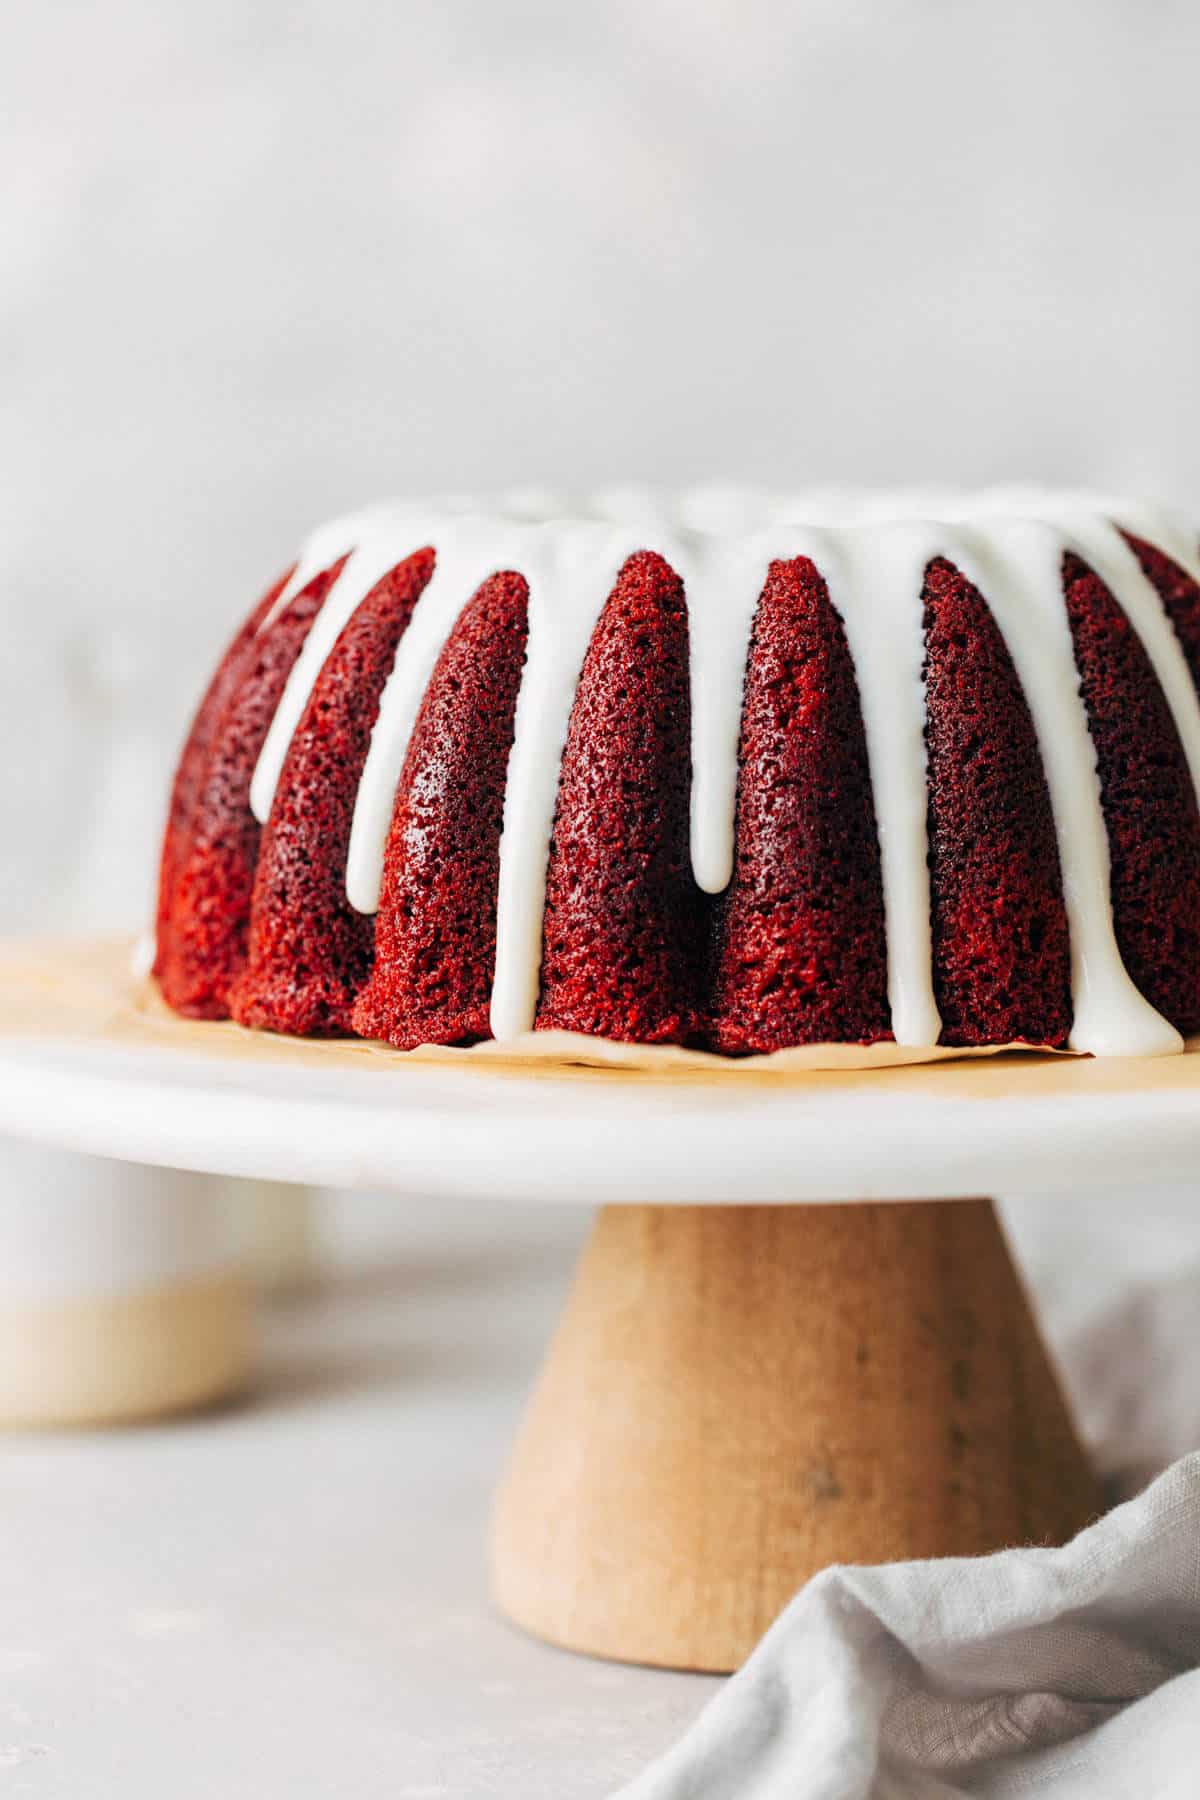 How Long Are Bundt Cakes Good for? 2